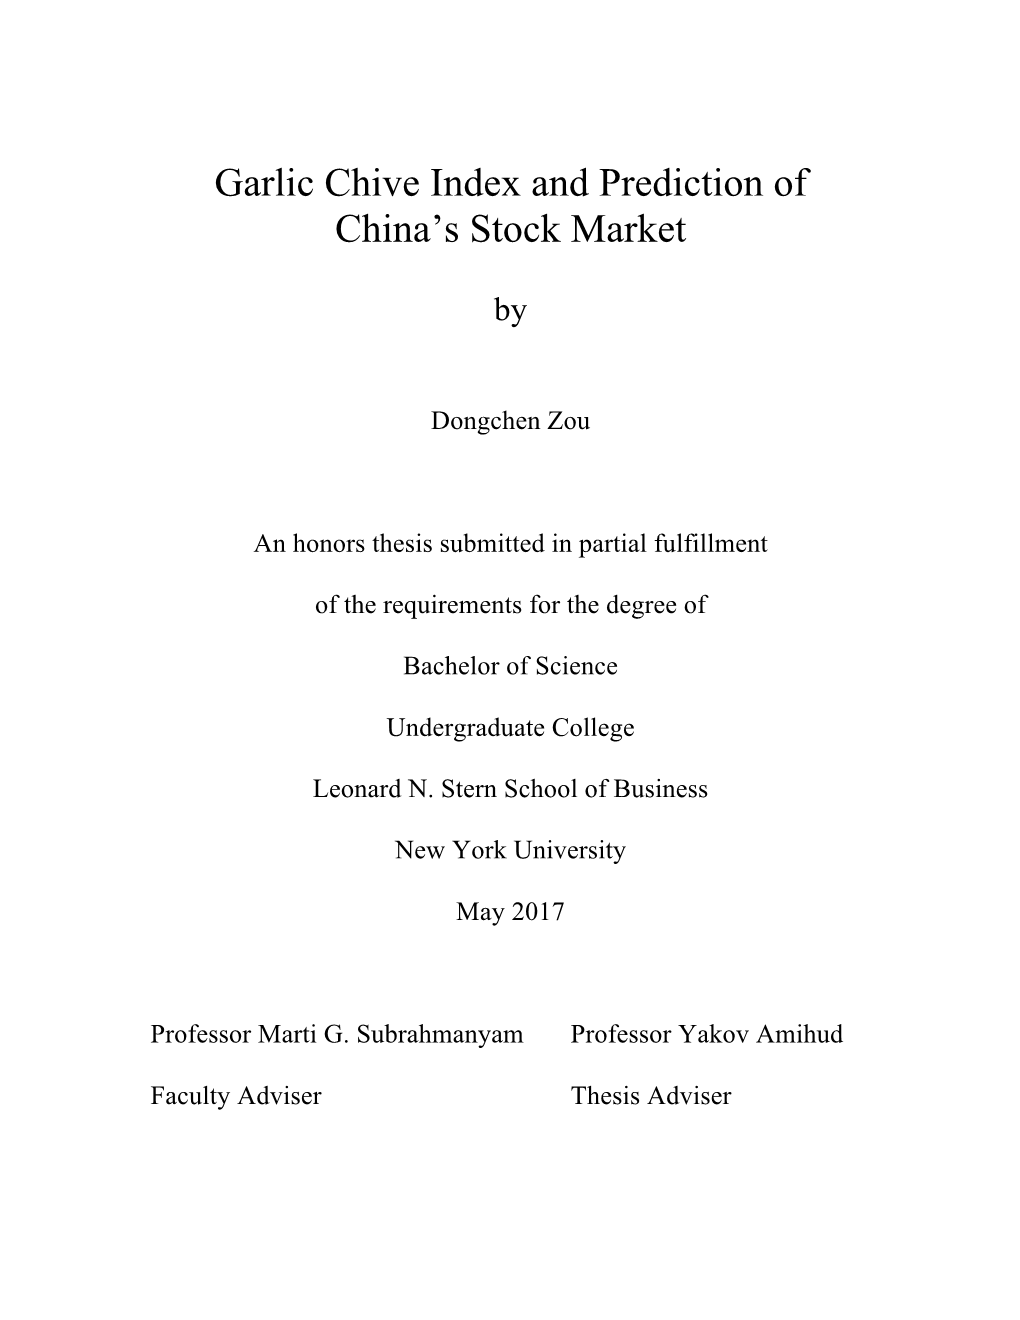 Garlic Chive Index and Prediction of China's Stock Market